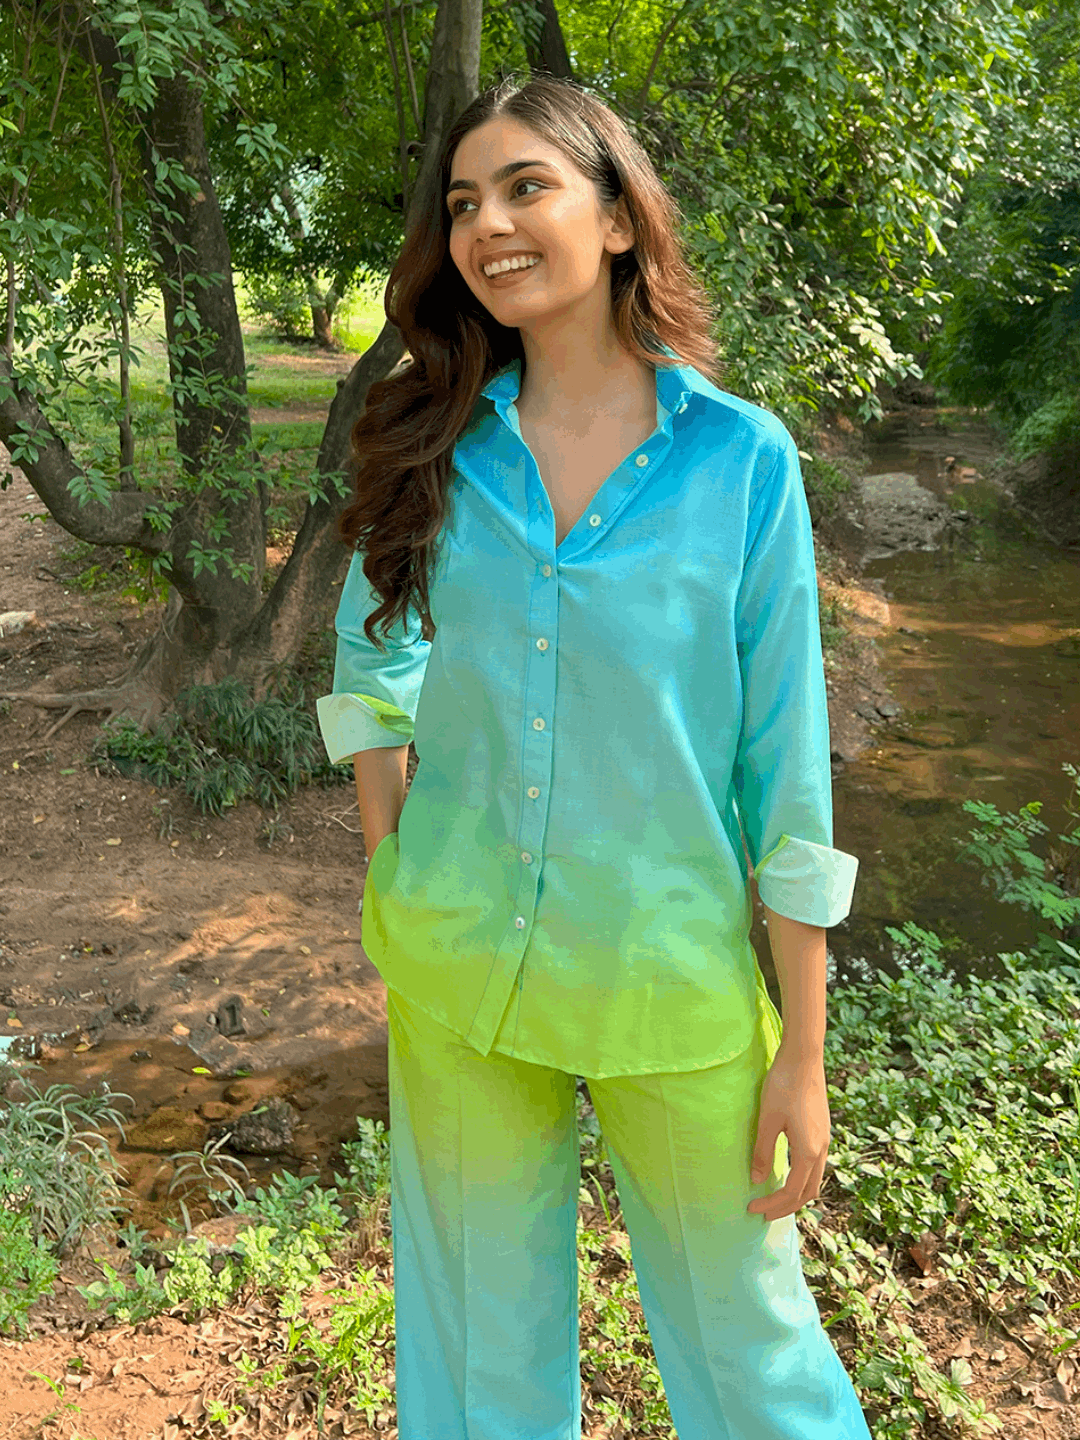 The model in the image is wearing Ombre Cotton Neon Co ord Set from Alice Milan. Crafted with the finest materials and impeccable attention to detail, the Co-ord Set looks premium, trendy, luxurious and offers unparalleled comfort. It’s a perfect clothing option for loungewear, resort wear, party wear or for an airport look. The woman in the image looks happy, and confident with her style statement putting a happy smile on her face.